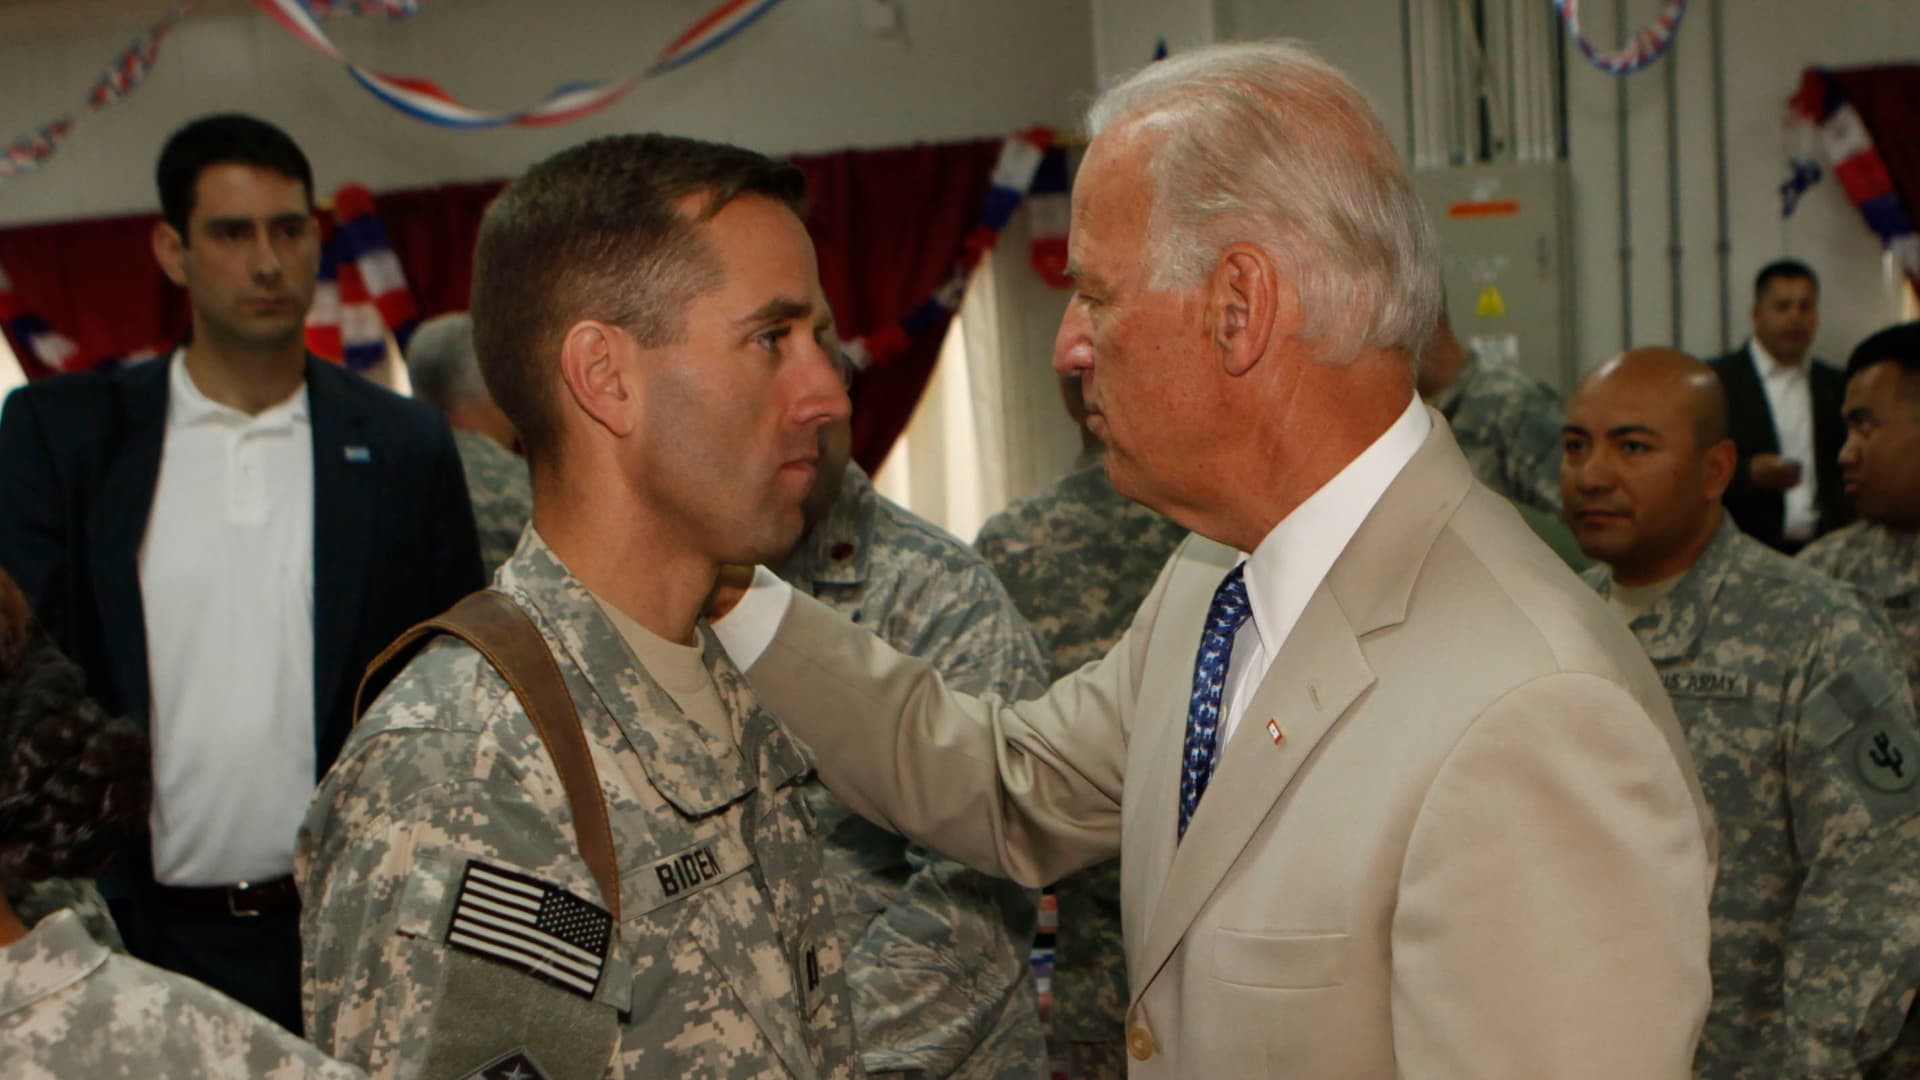 U.S. Vice President Joe Biden talks with his son U.S. Army Capt. Beau Biden (L) at Camp Victory on July 4, 2009 near Baghdad, Iraq. Bidden's first visit to Iraq as the Vice President comes days after U.S. forces pulled out from Iraq's cities.